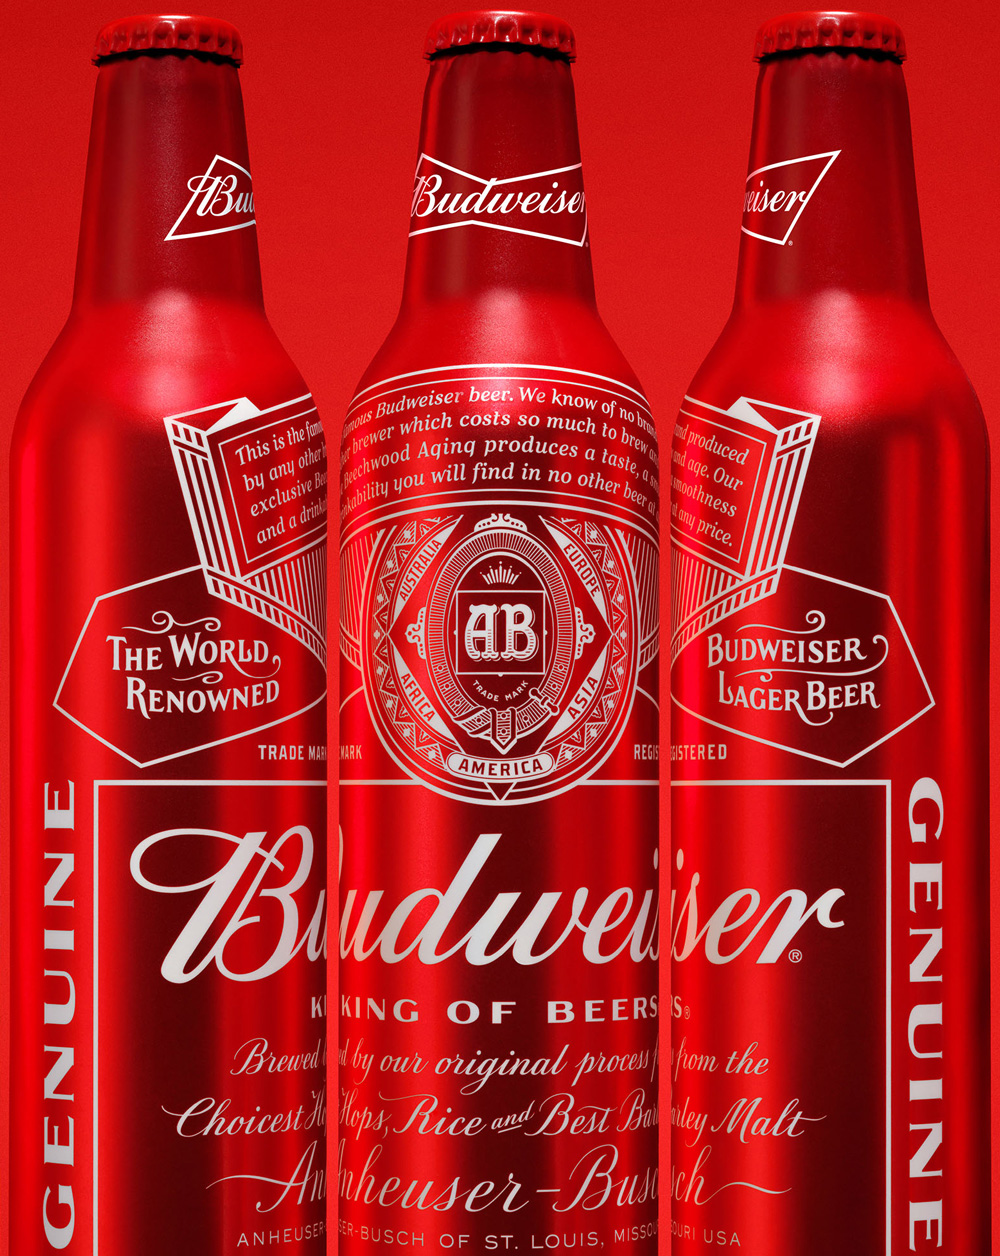 Brand New New Logo and Packaging for Budweiser by Jones